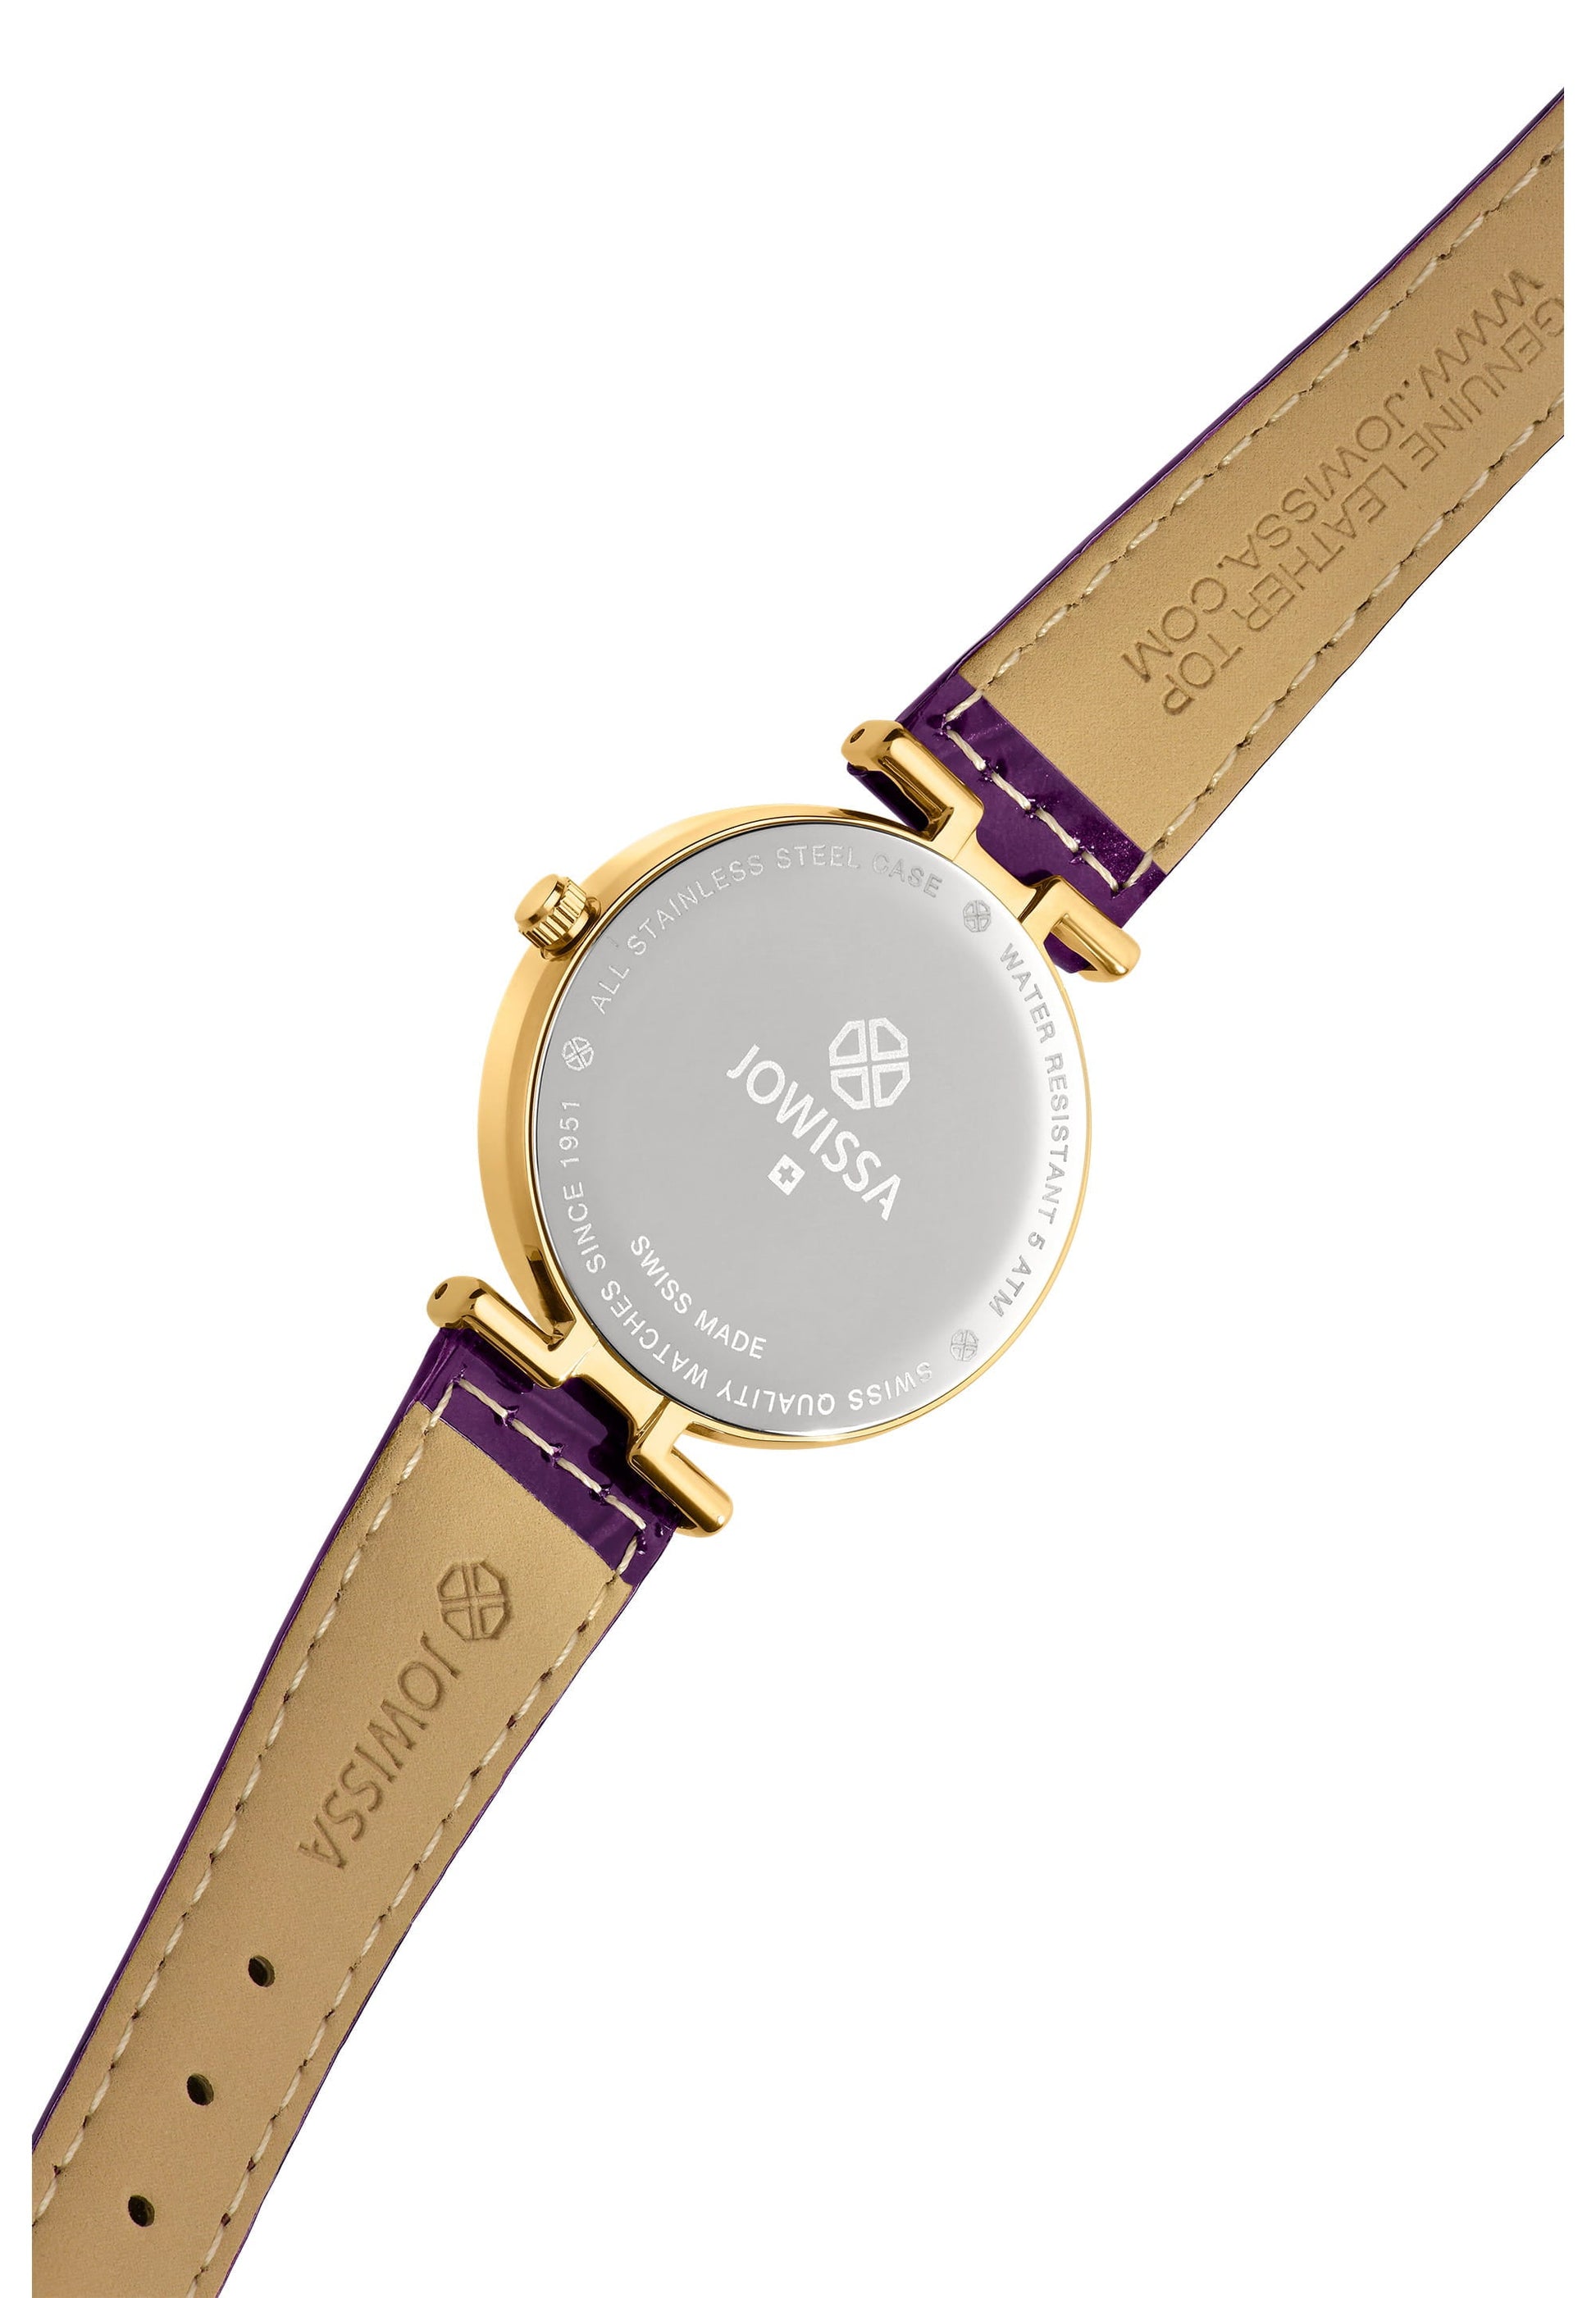 Facet Brilliant Swiss Ladies Watch J5.753.M, Jowissa, Watches, facet-brilliant-swiss-ladies-watch-j5-753-m-341656147, 2021, 2022, category-reference-2995, EN Quartz, Facet Brilliant, female, Flag--Swiss Made, Genuine Leather, gold, Gold / Purple, Leather, NOT-InStock-Hamburg, NOT_archived, order--183, purple, related--J5.616.M, related--J5.751.M, related--J5.752.M, related--J5.754.M, related--J5.759.M, related--J8.075.M, related--JS.0047, related--JS.0054, related--JS.0061, related--JS.0083, size--30mm, Sta